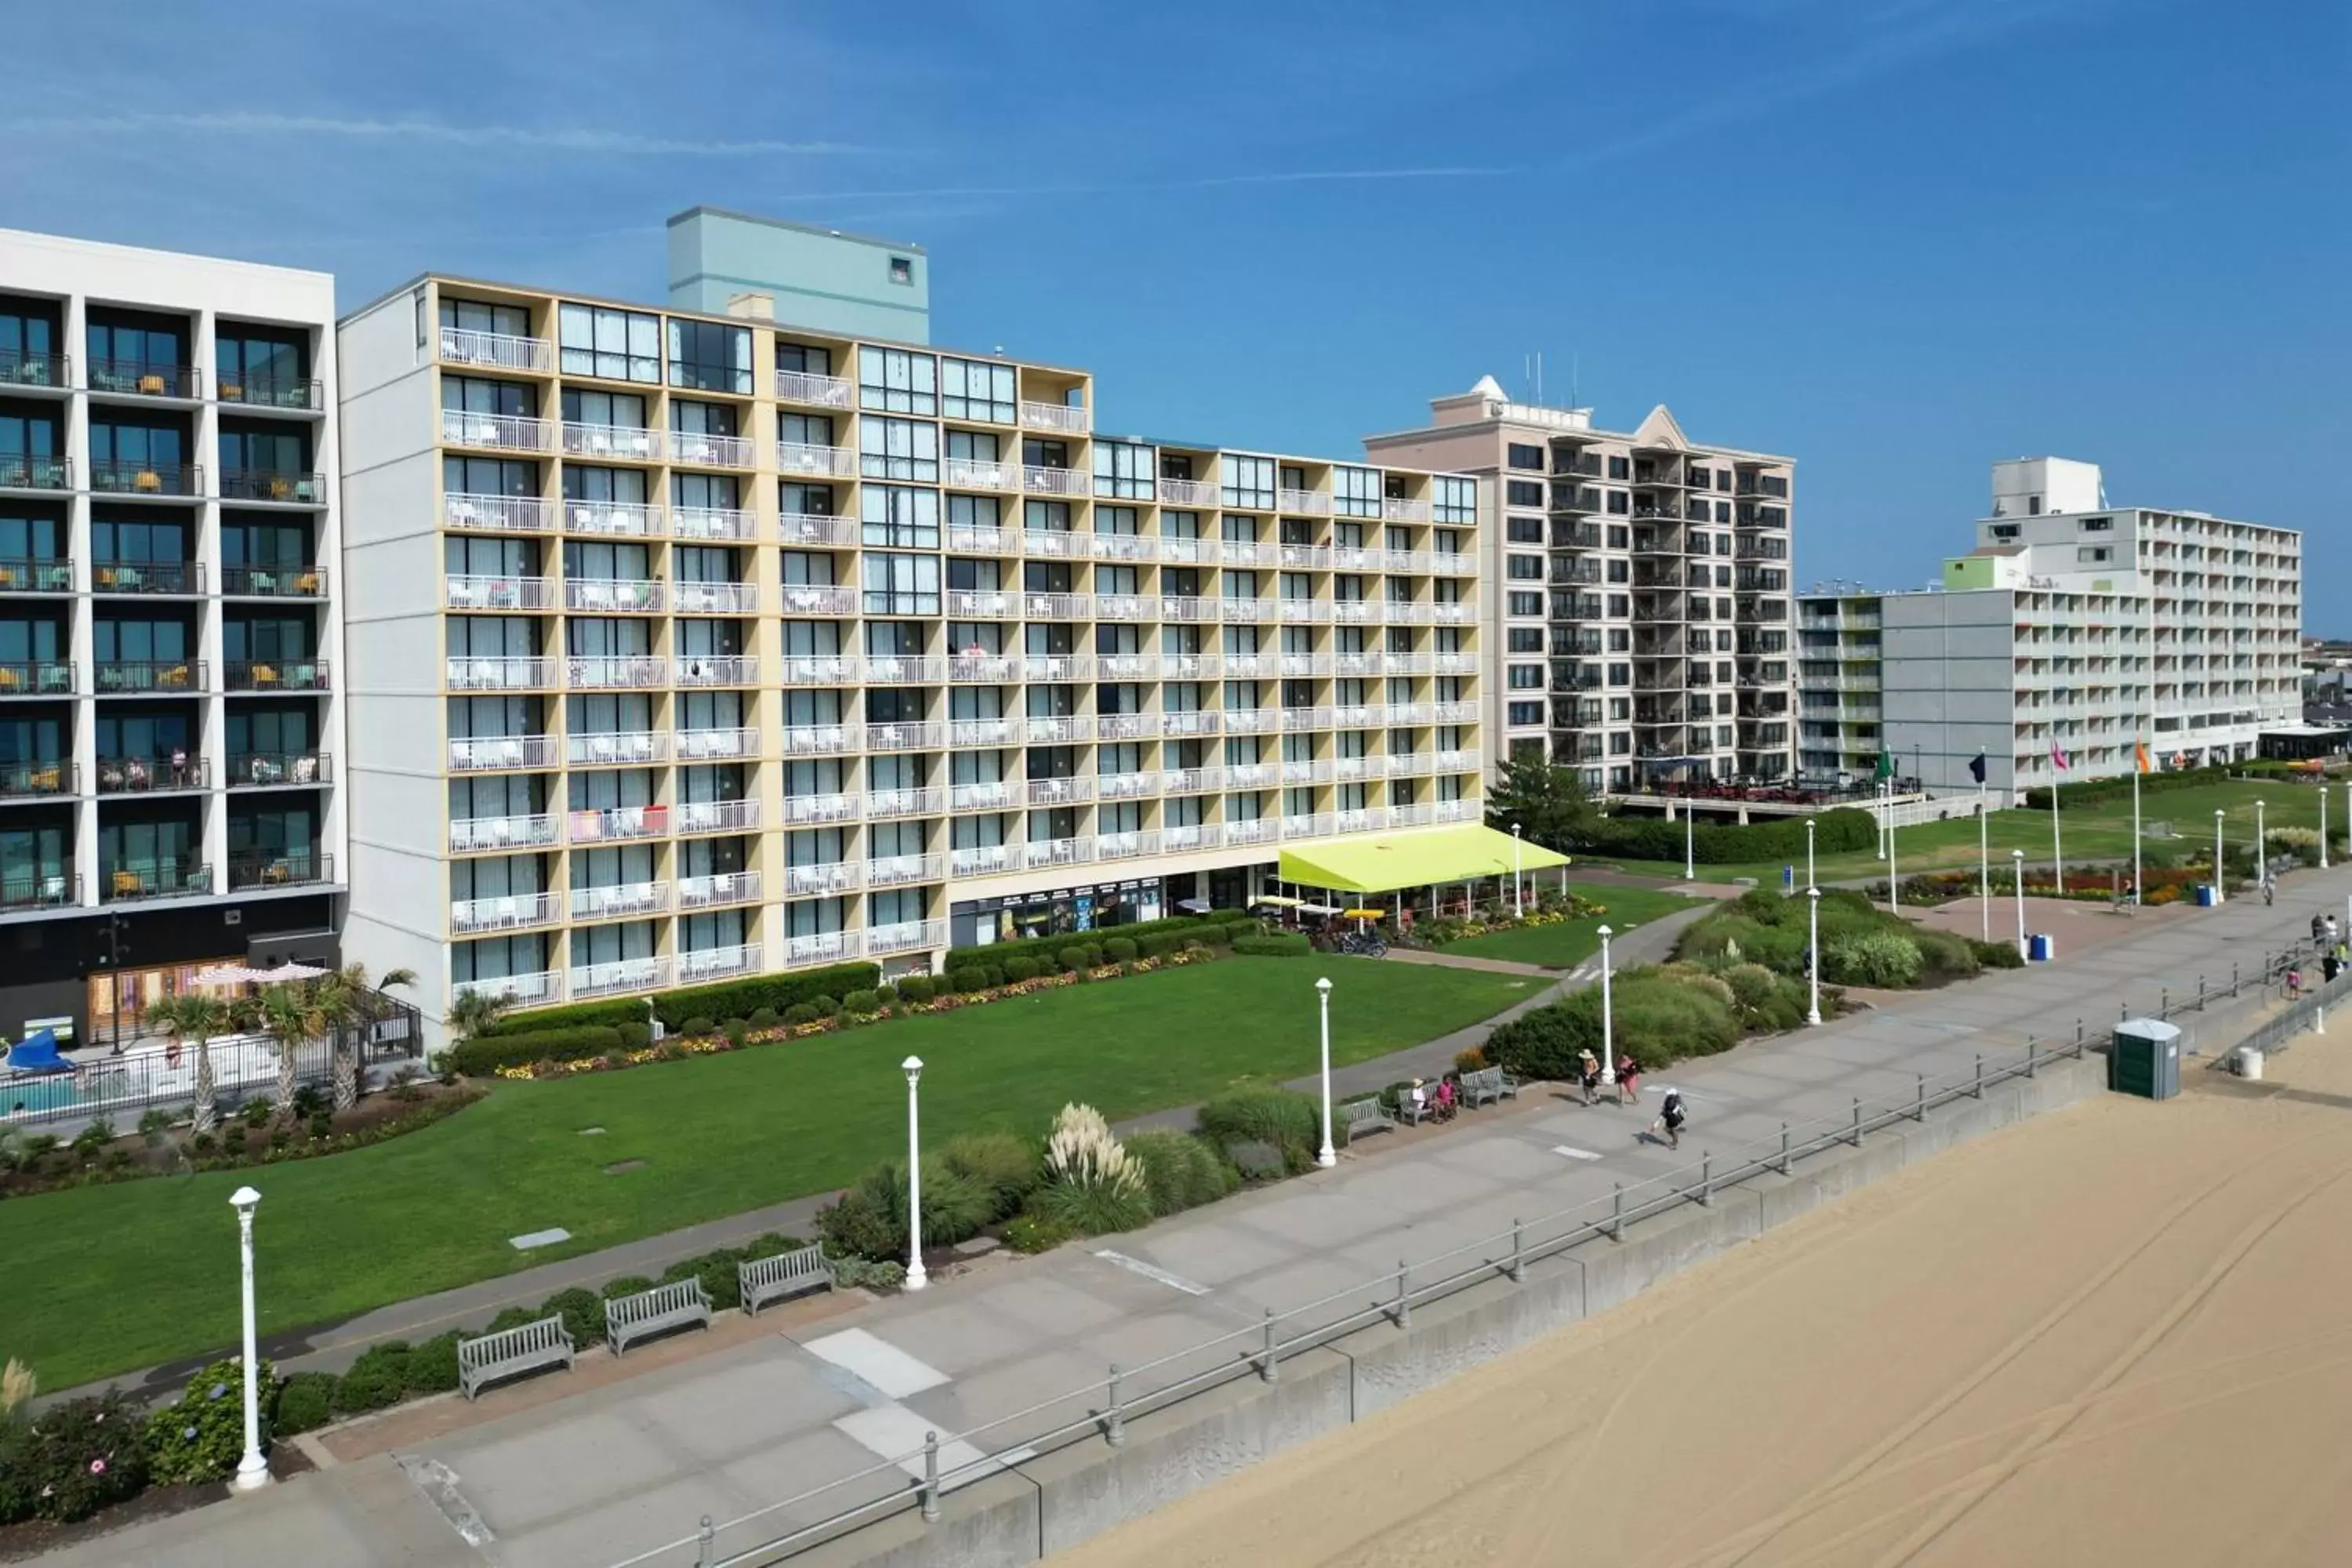 Property building in Four Points by Sheraton Virginia Beach Oceanfront